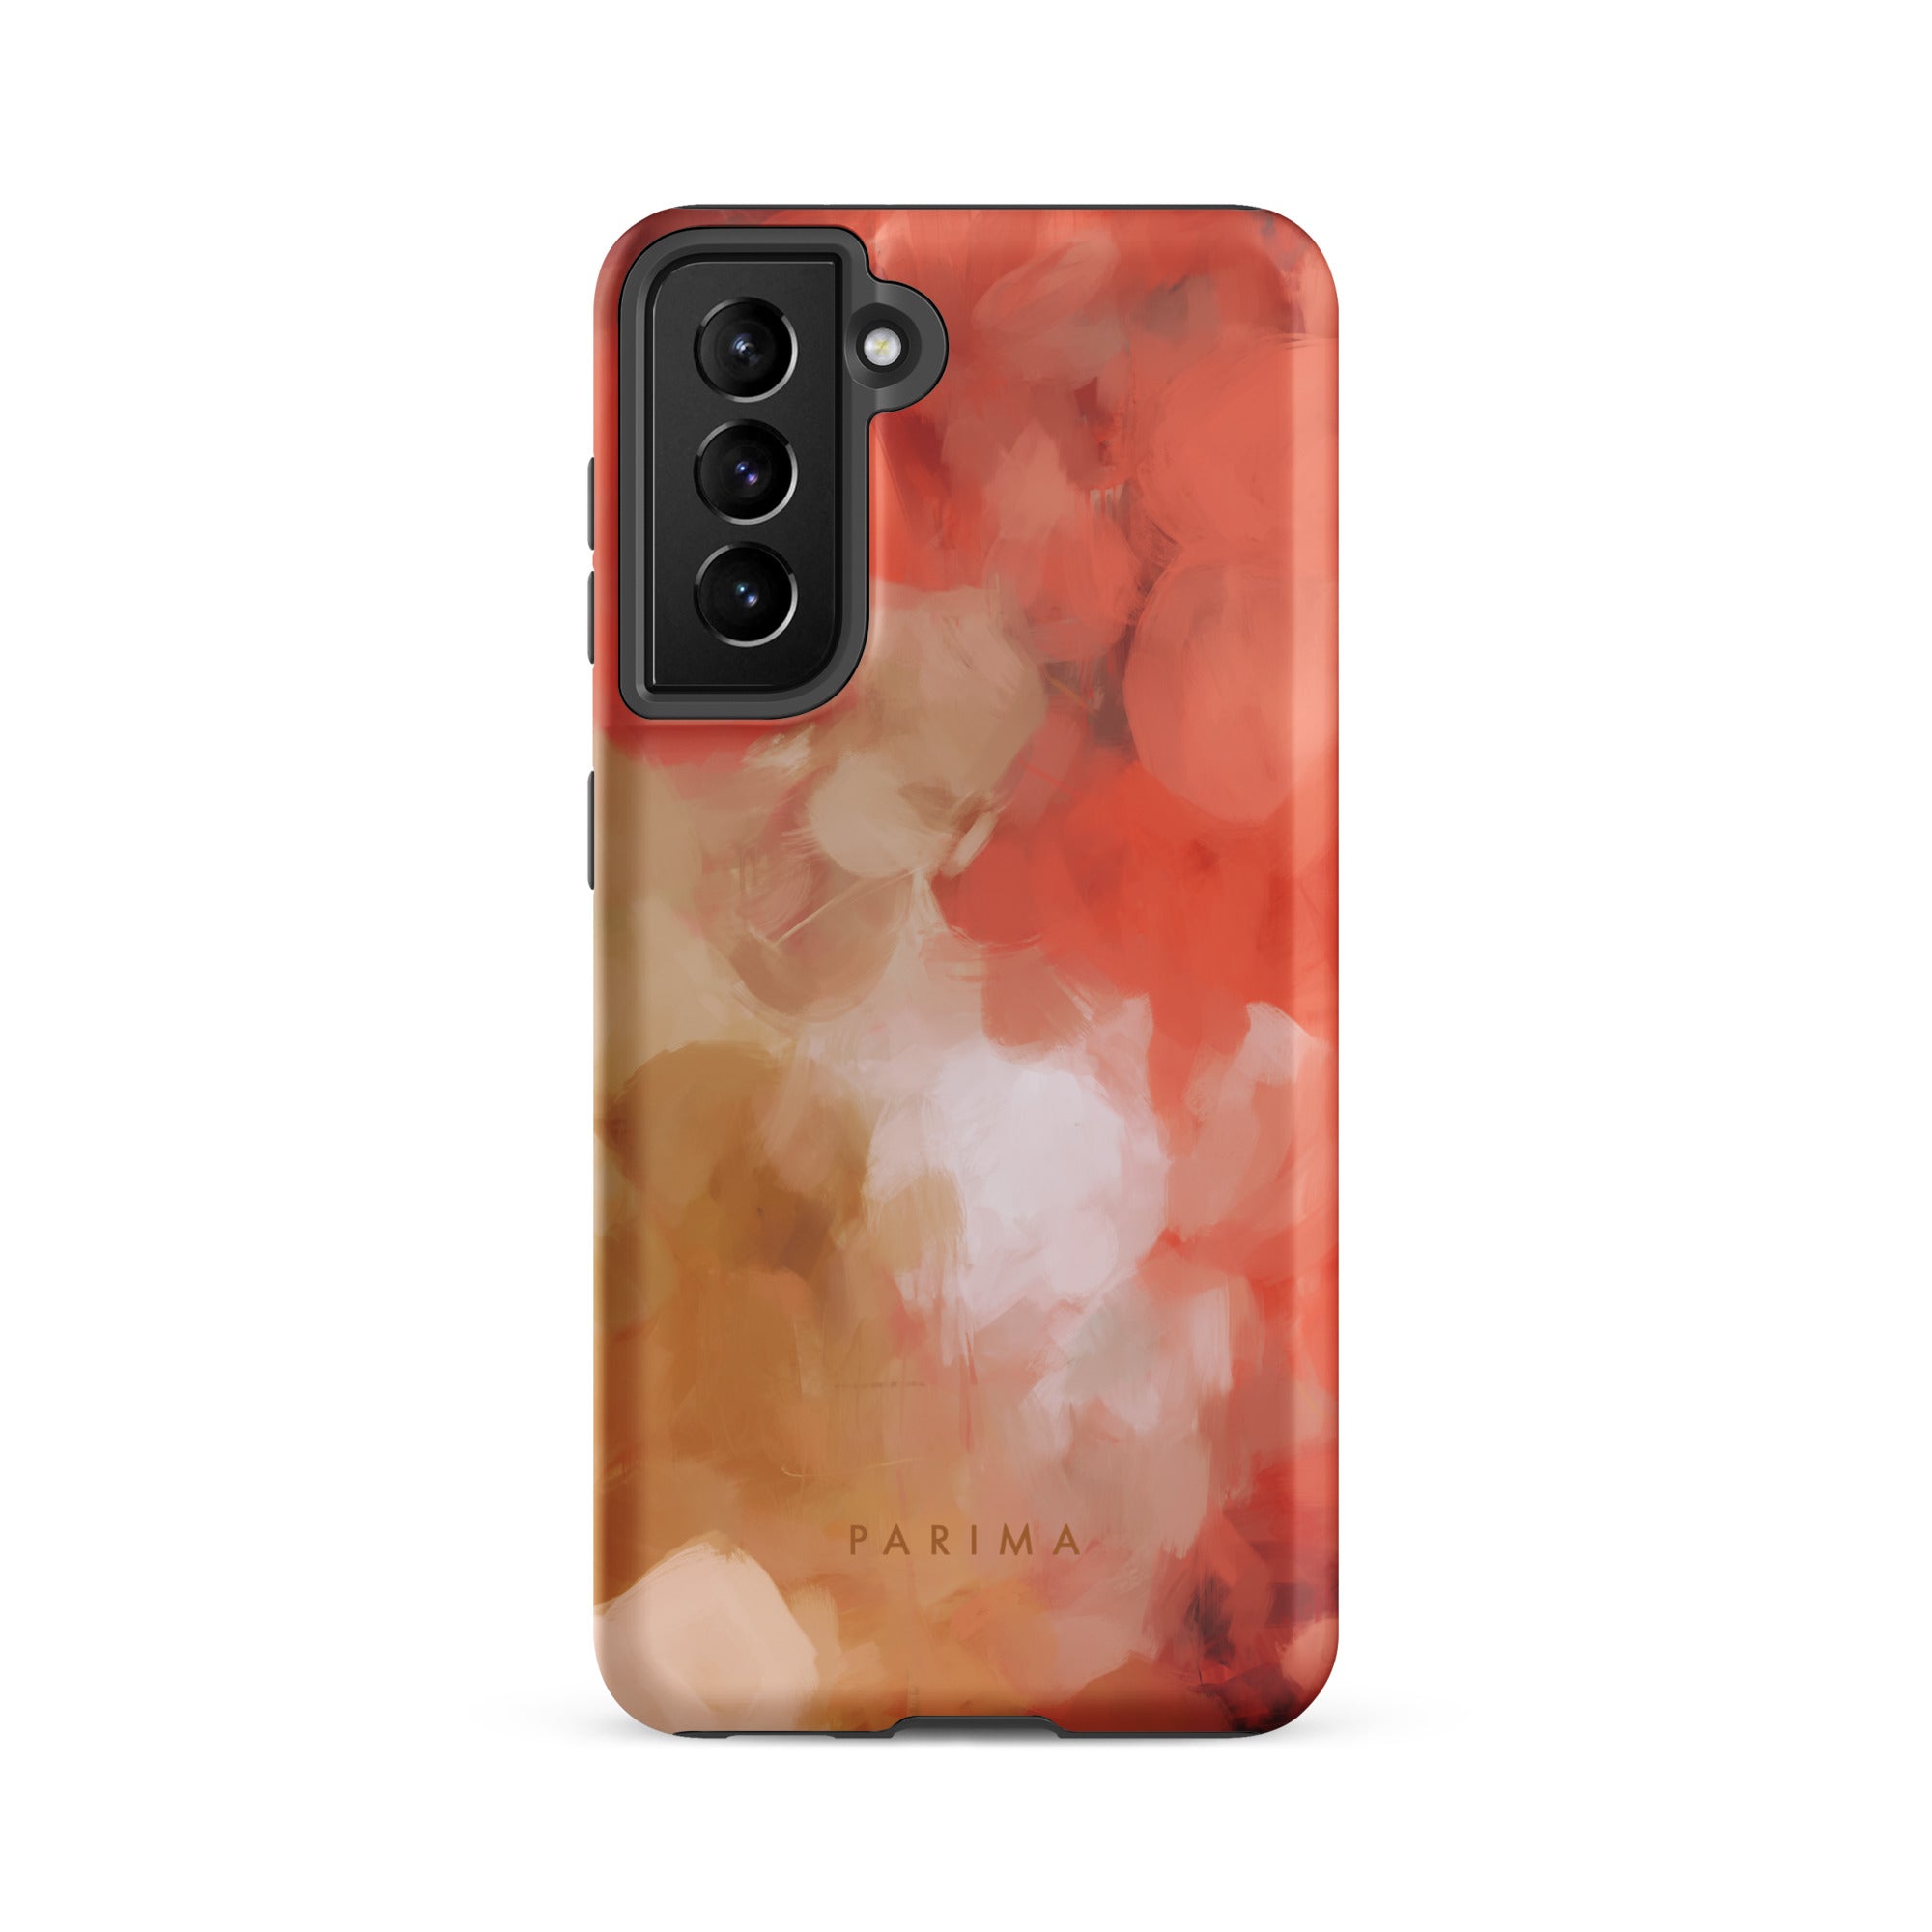 Begonia, pink and gold abstract art on Samsung Galaxy S21 FE tough case by Parima Studio